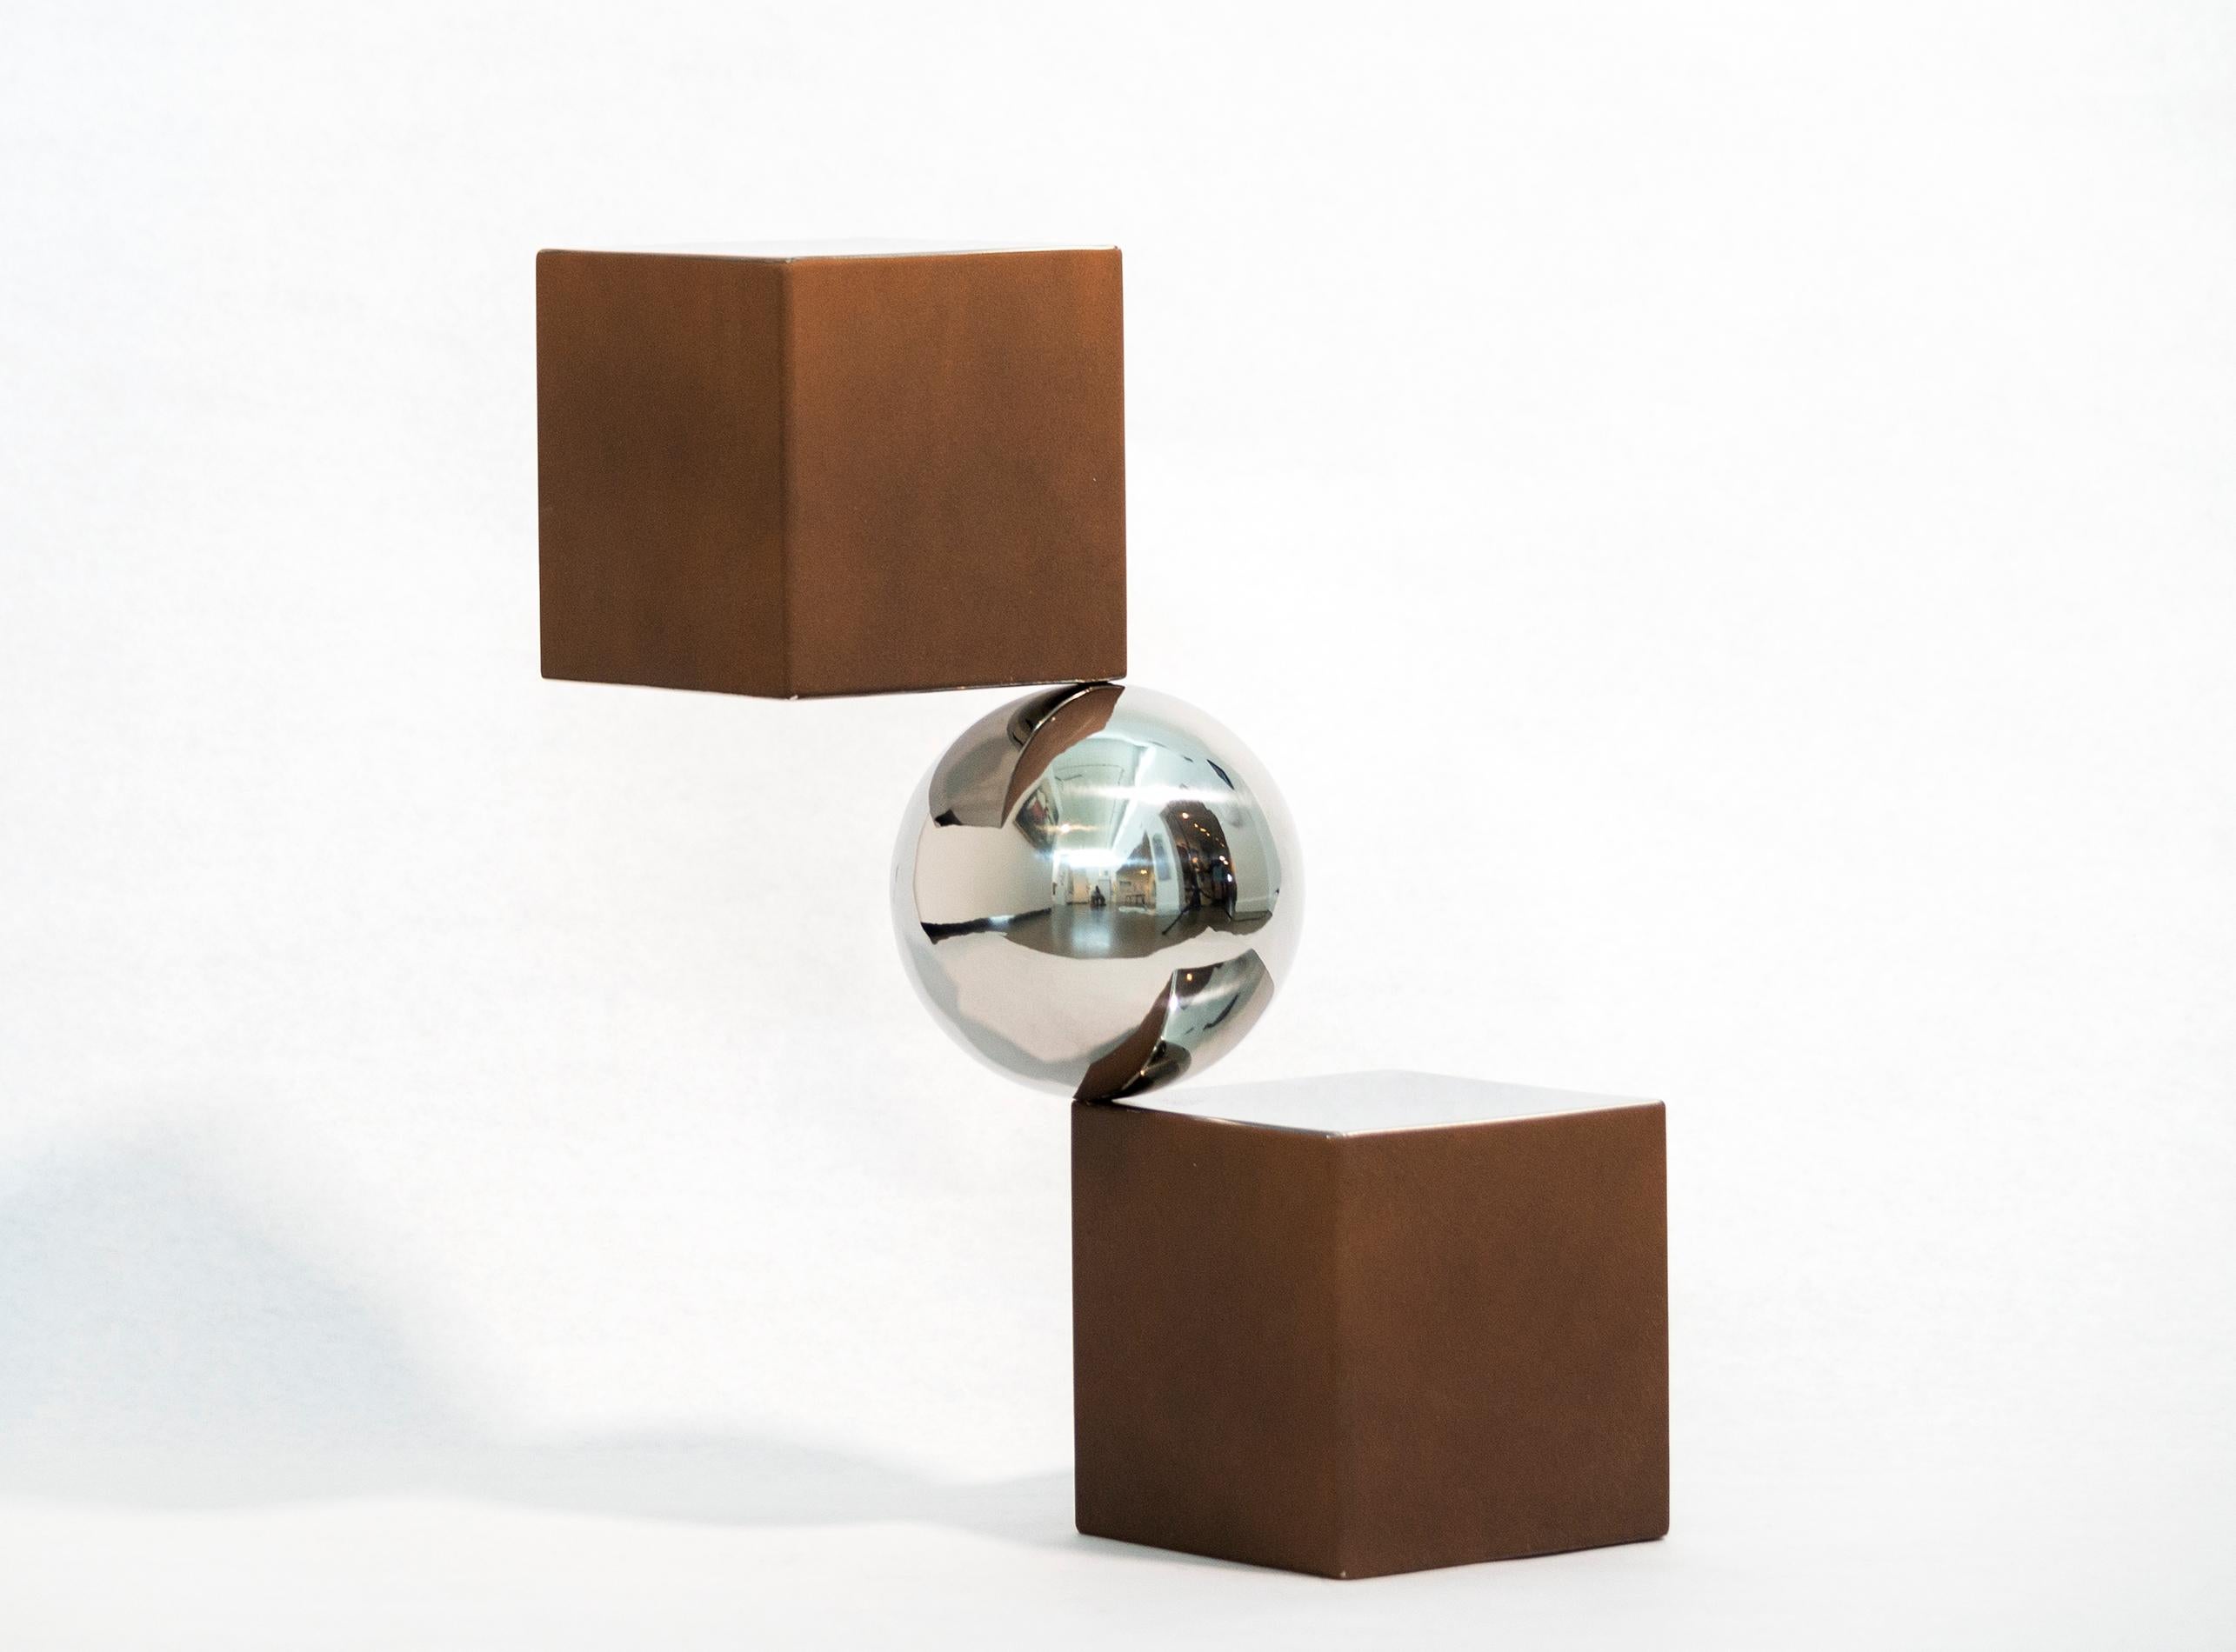 Equilibre 2-Tone 1/10 - geometric abstract, modern, polished. aluminum sculpture For Sale 3